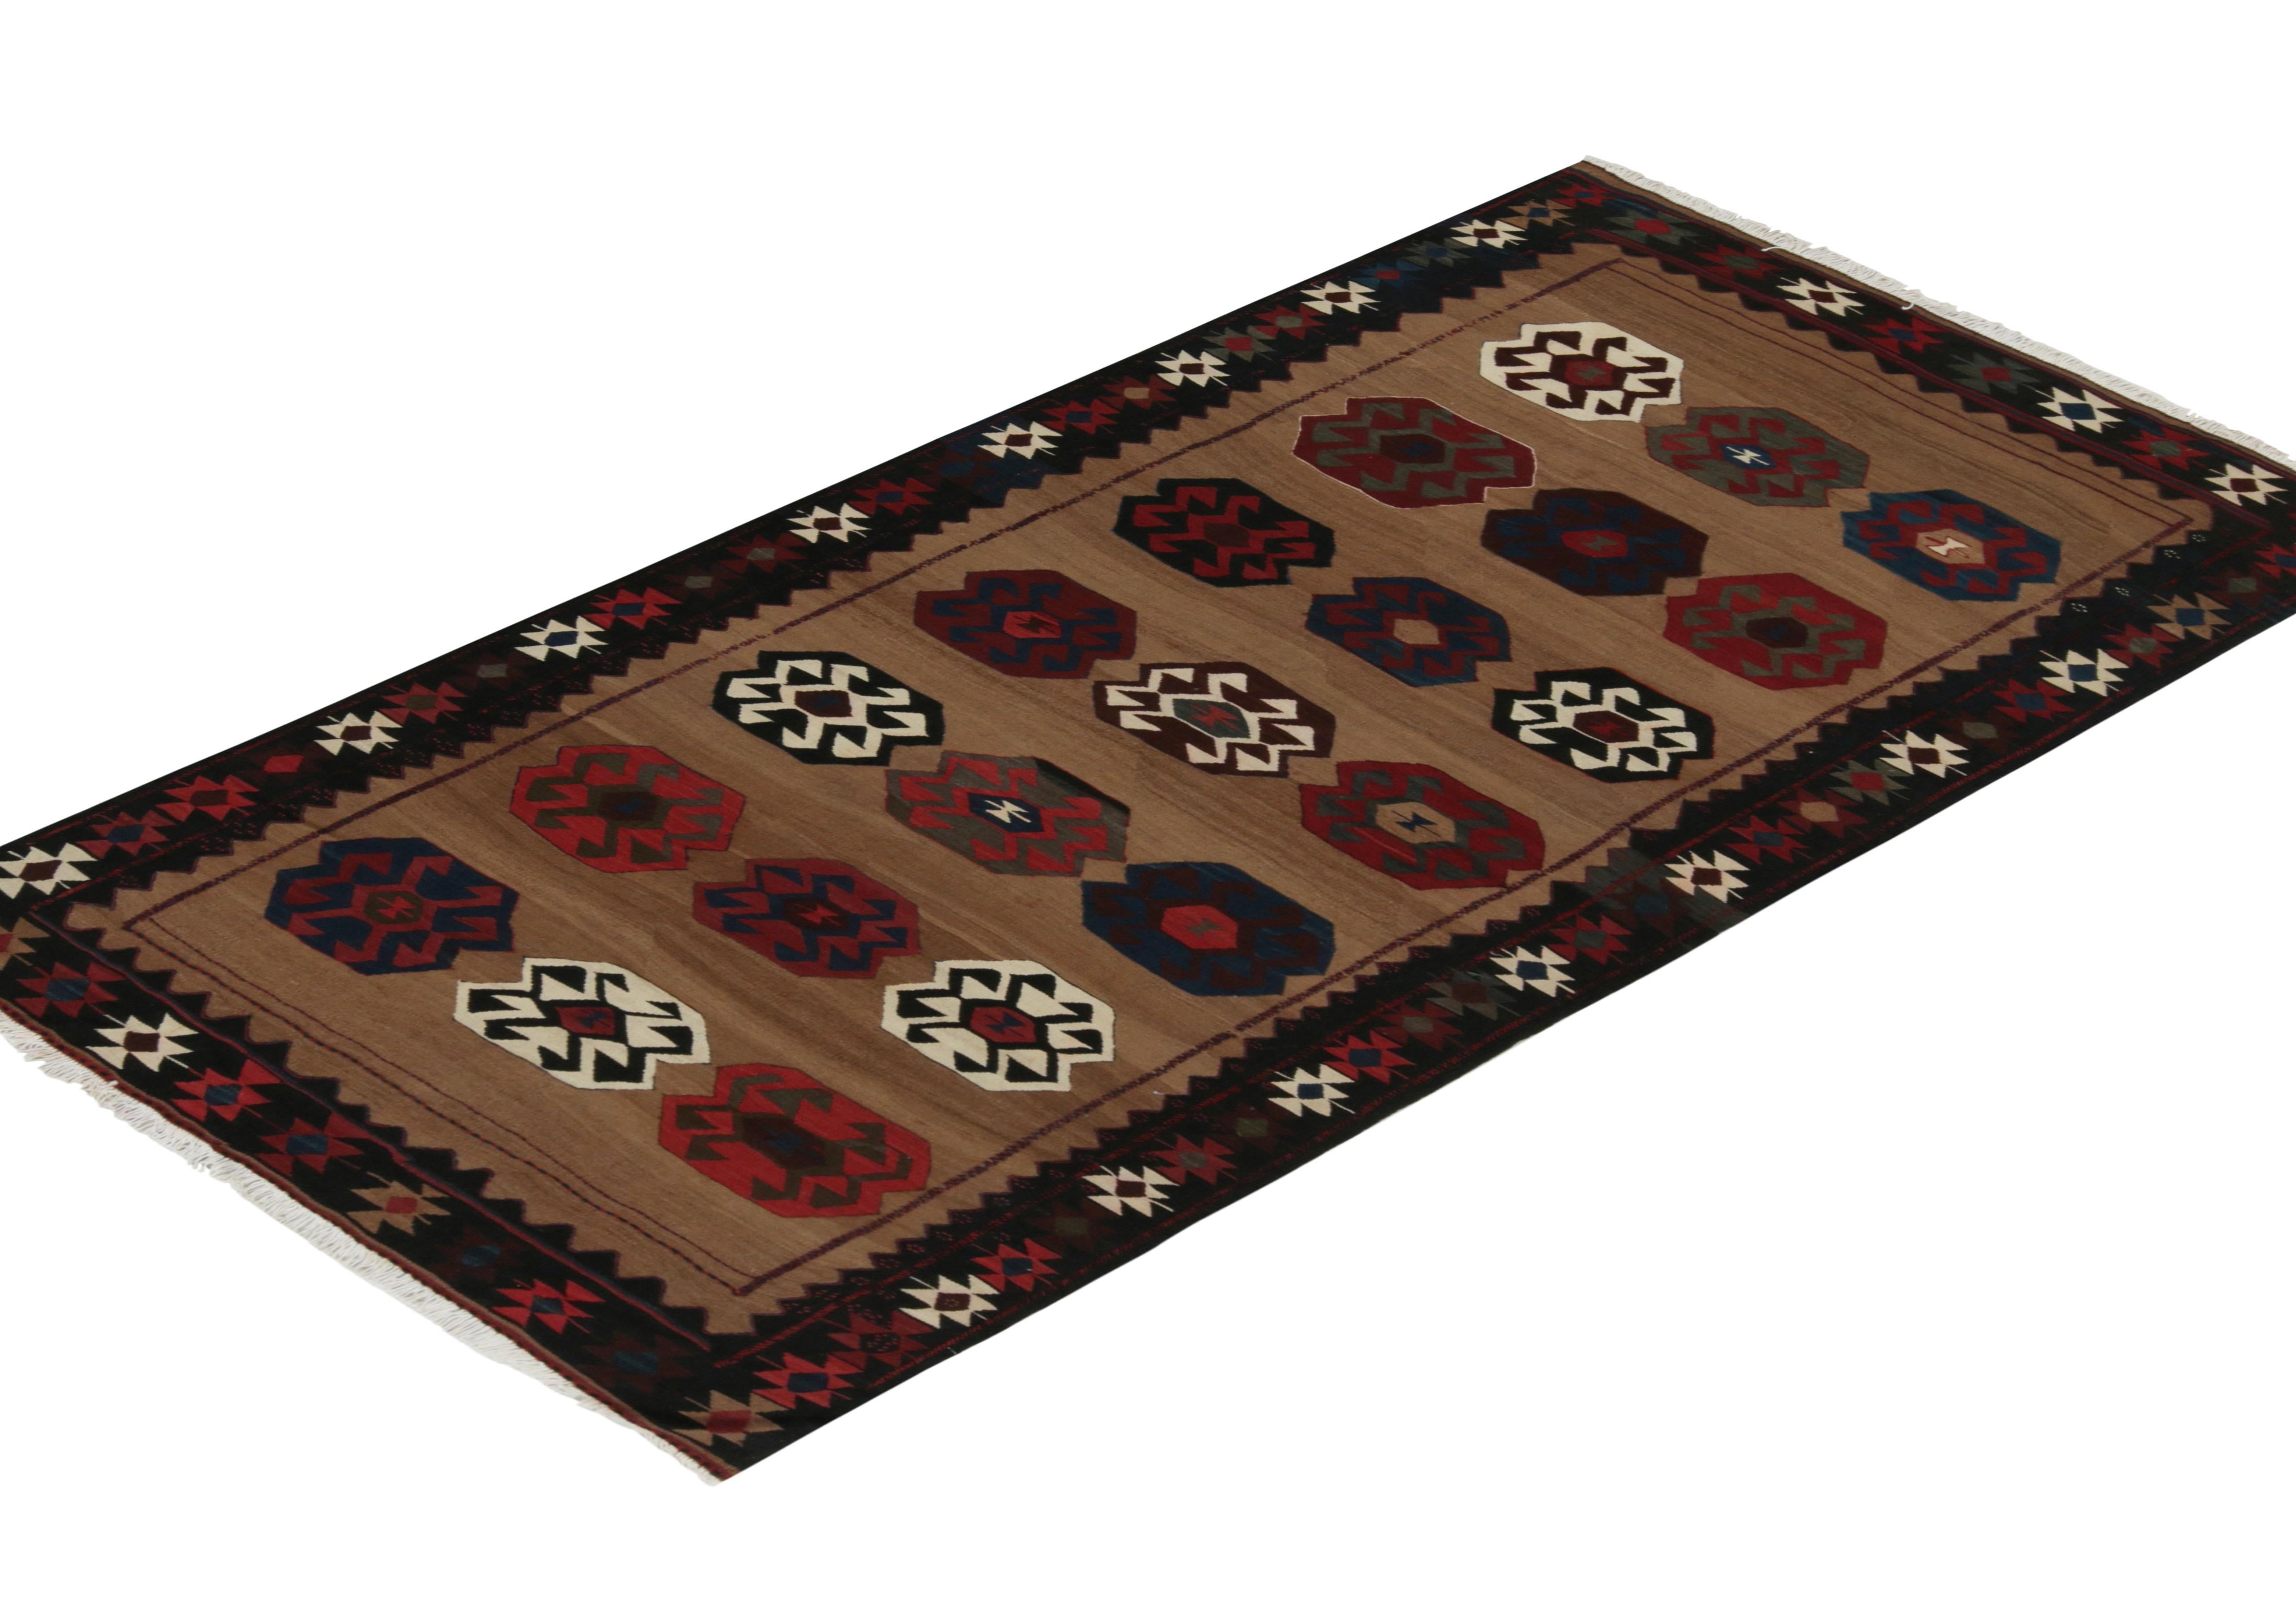 This vintage 5x9 Persian kilim is a unique tribal rug for its period, handwoven in wool circa 1950-1960.

Further on the Design:

A brown open field hosts repeated medallions with ram’s horn motifs, and an emphasis on red, blue, black, and white